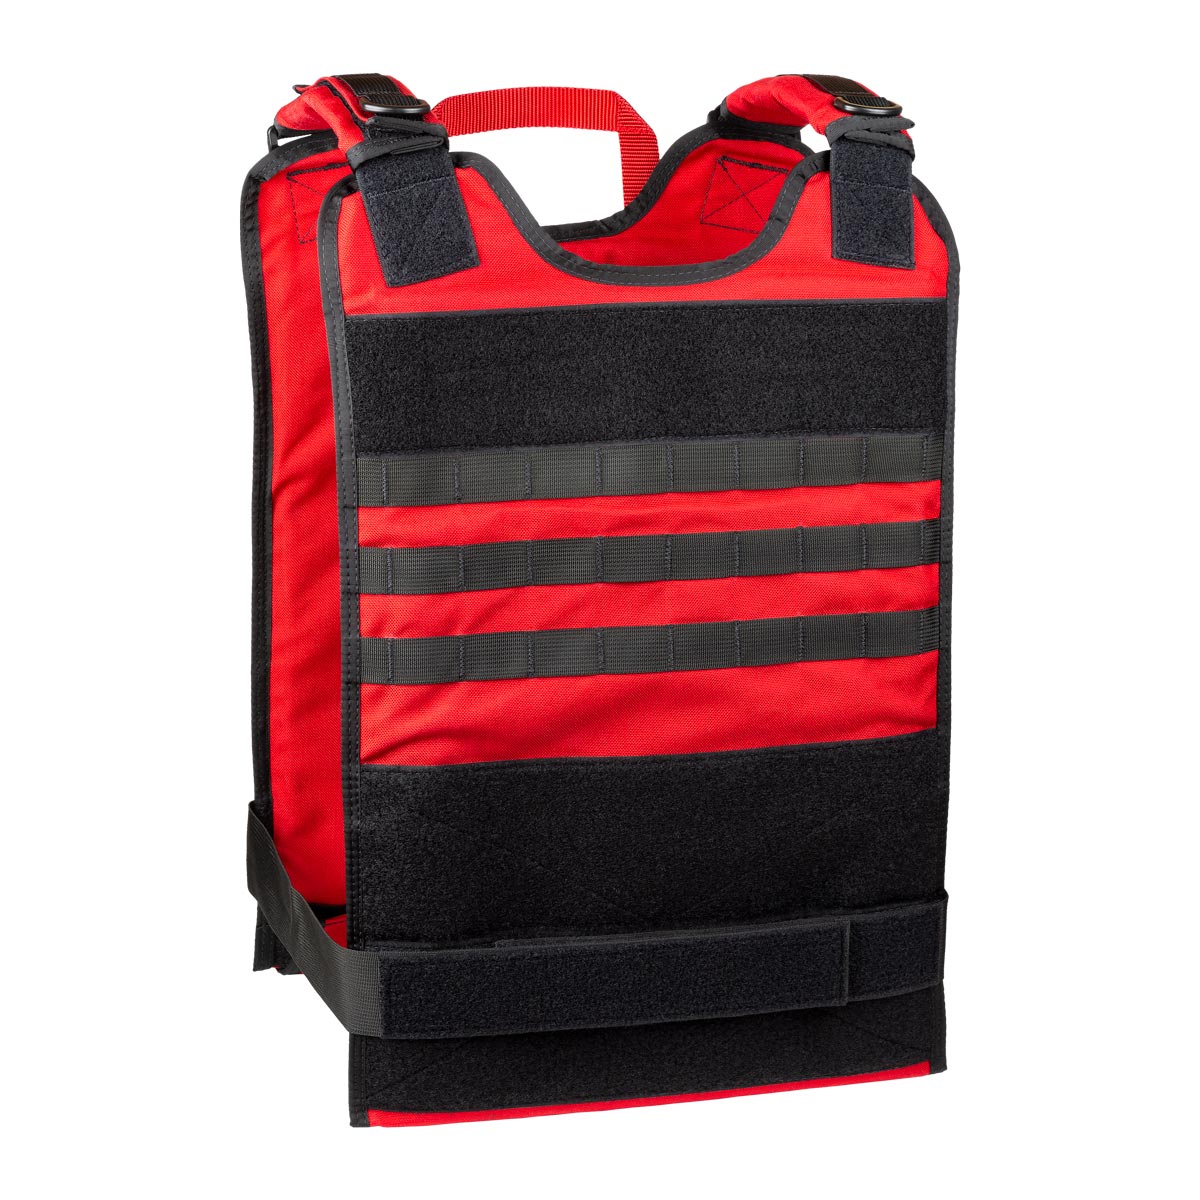 TacMed™ Responder Armor System - Plate Carrier Only (No Armor)